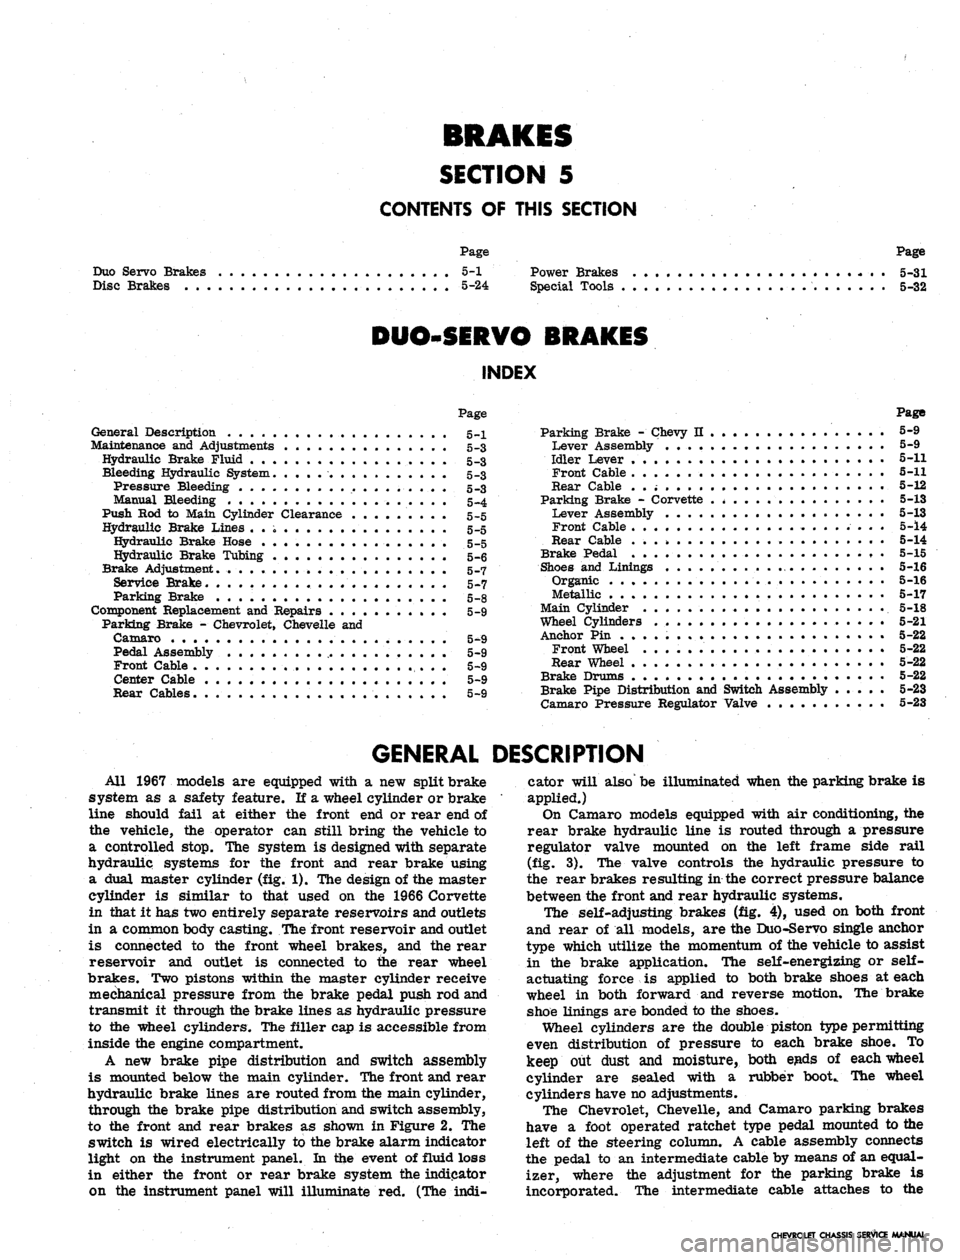 CHEVROLET CAMARO 1967 1.G Chassis Repair Manual 
BRAKES

SECTION 5

CONTENTS OF THIS SECTION

Duo Servo Brakes

Disc Brakes 
Page

5-1 Power Brakes

5-24 Special Tools 
Page

5-31

5-32

DUO-SERVO BRAKES

INDEX

Page

General Description 5-1

Maint